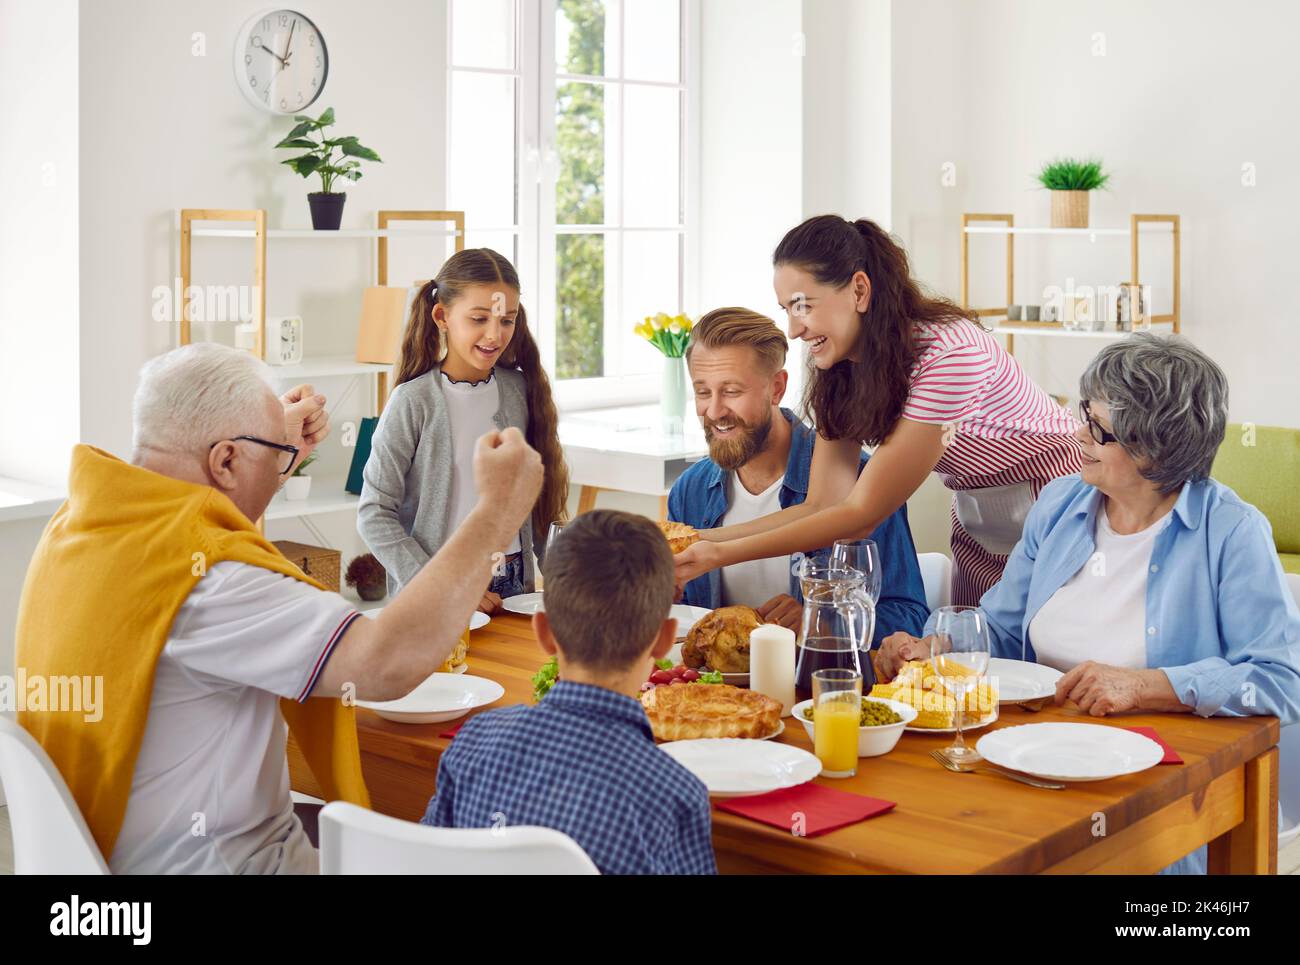 Happy cheerful family sitting around table at home and enjoying family meal together Stock Photo